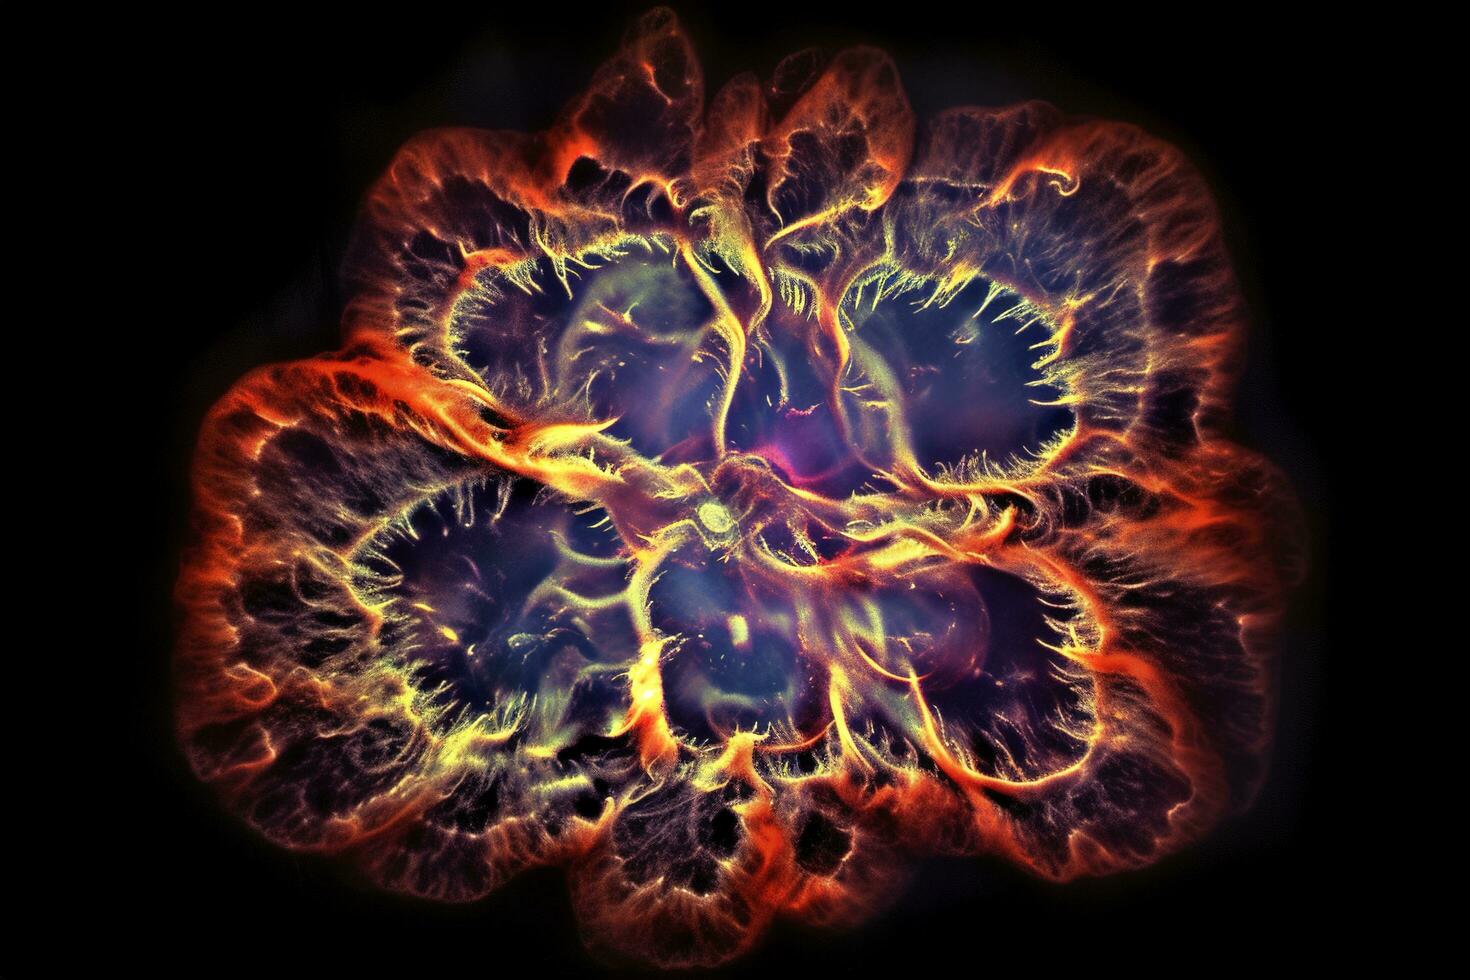 Capturing the intricate details of the Crab Nebula, a supernova remnant that is one of the most studied and photographed deep space objects, generate ai photo